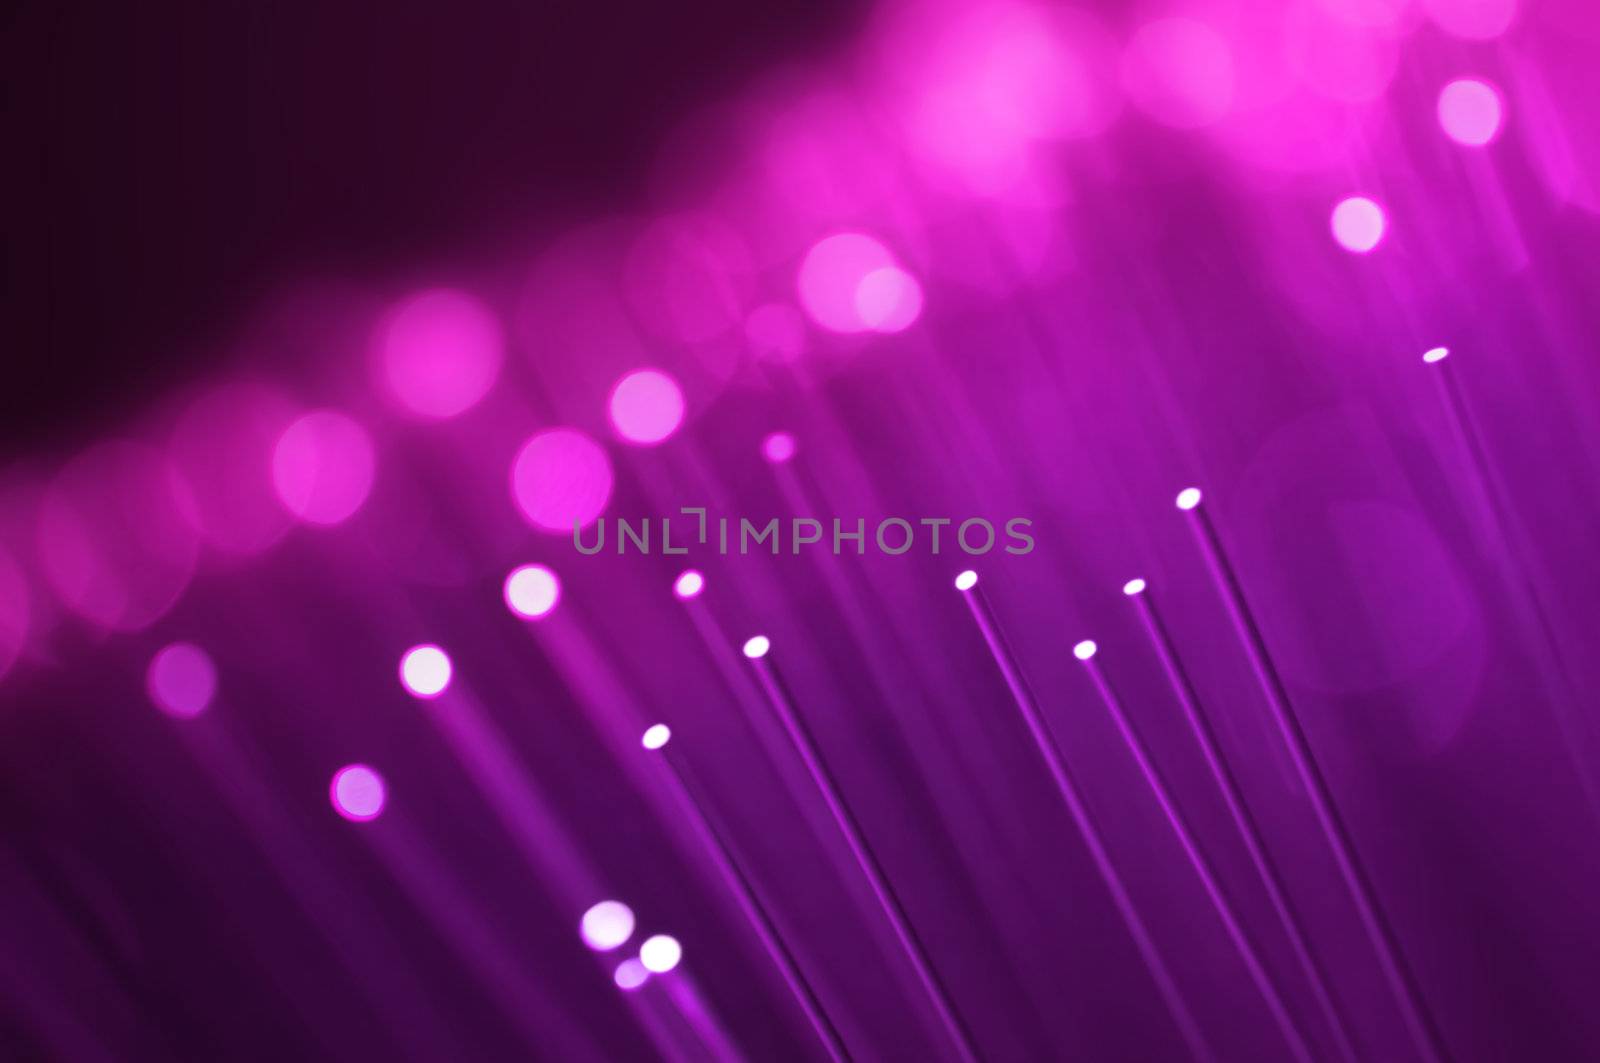 Close up on the ends of many illuminated pink and violet fiber optic strands with black background. Focus on foreground.